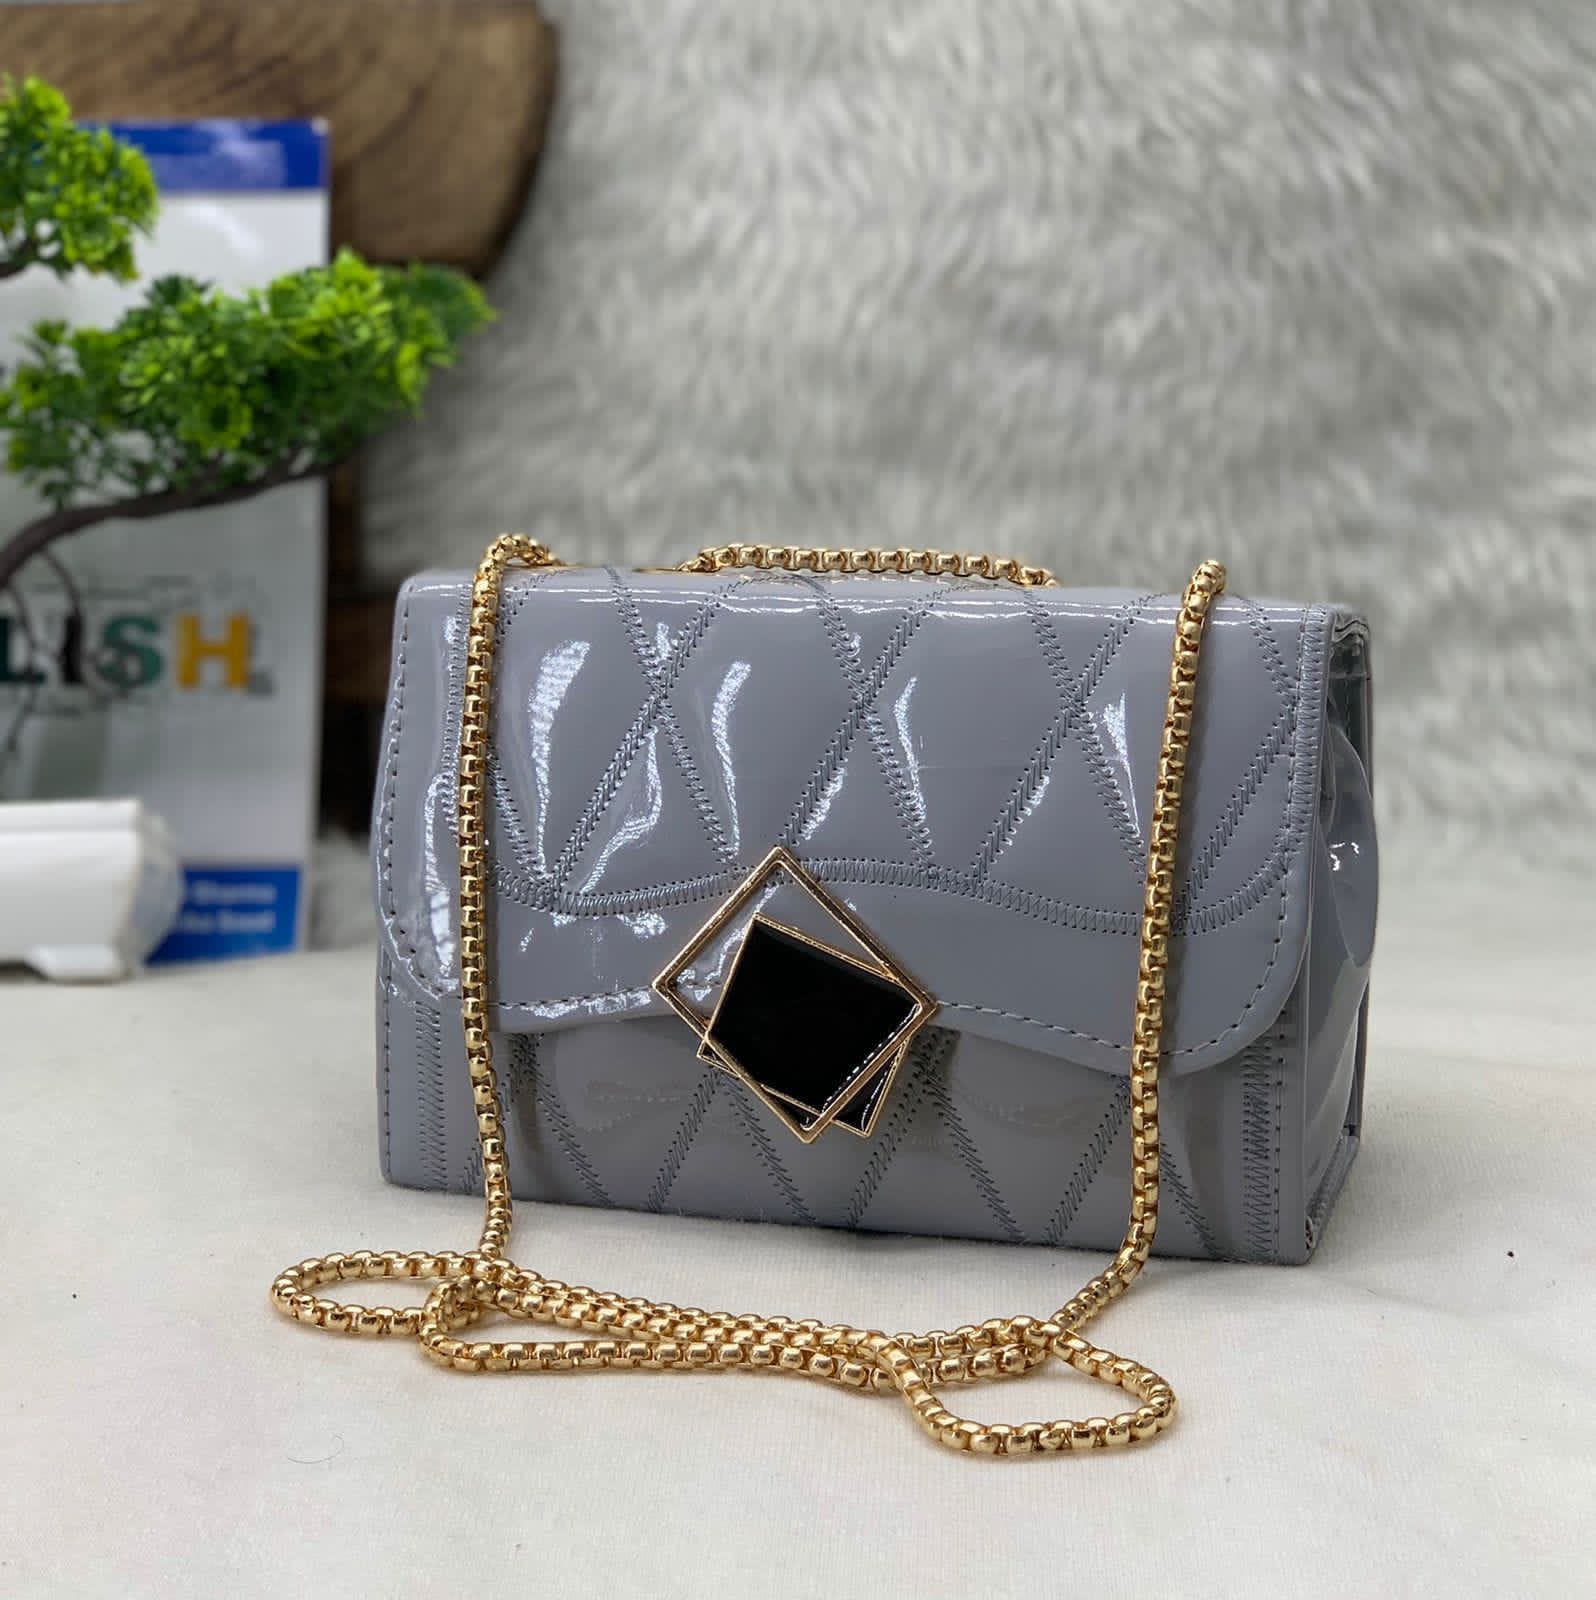 Rhinestone Bow Mini Rhinestone Shoulder Bag With Chain Strap Fashionable Girls  Handbag With Small Square Shape And Coin Purse From Childbag_wholesale,  $16.65 | DHgate.Com